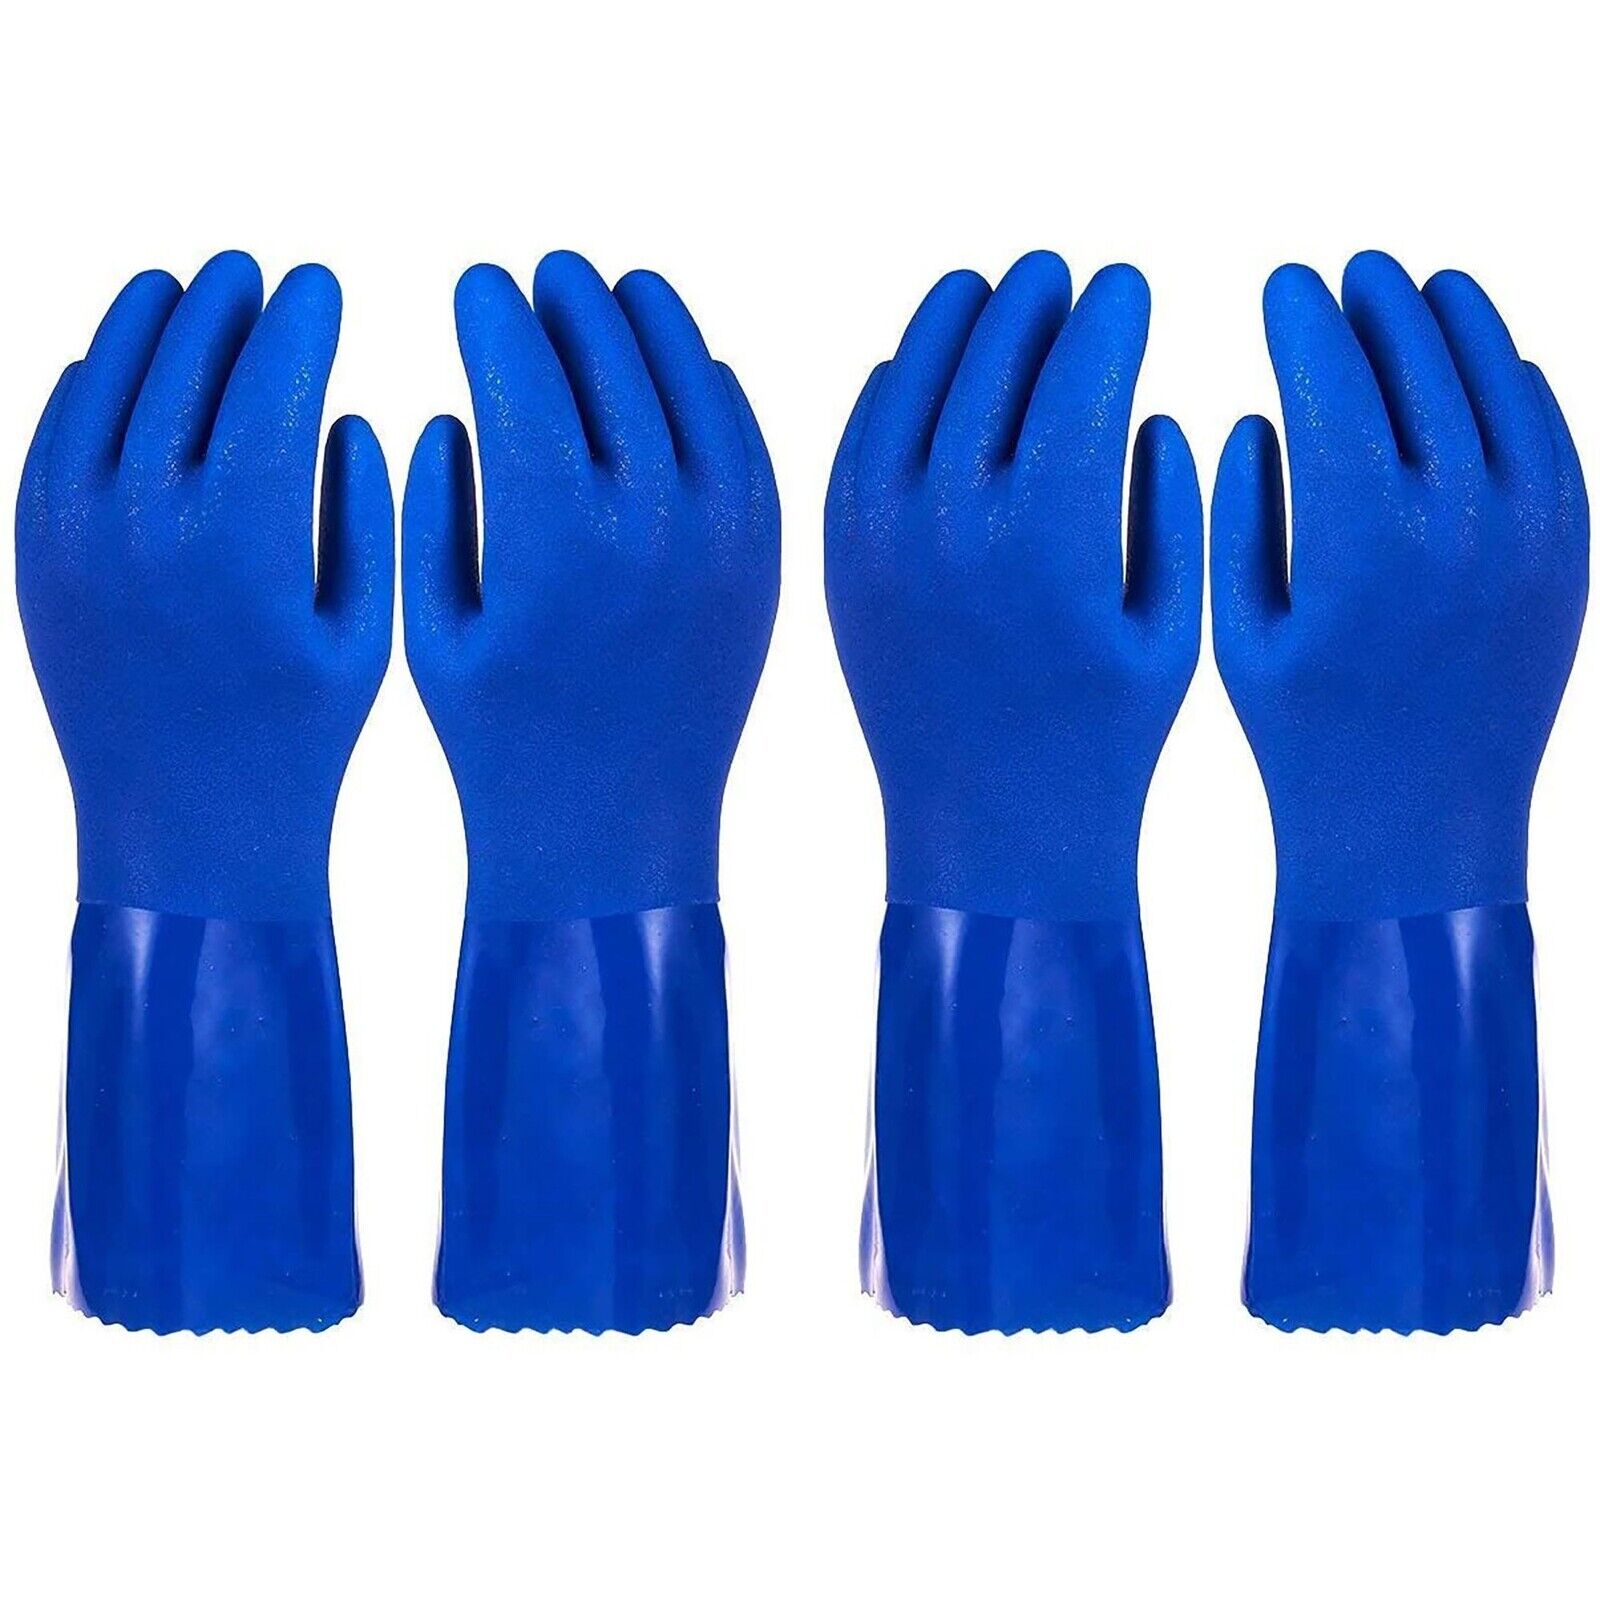 2 Pairs Heavy Duty Rubber Cleaning Gloves for Kitchen, Reusable, XL